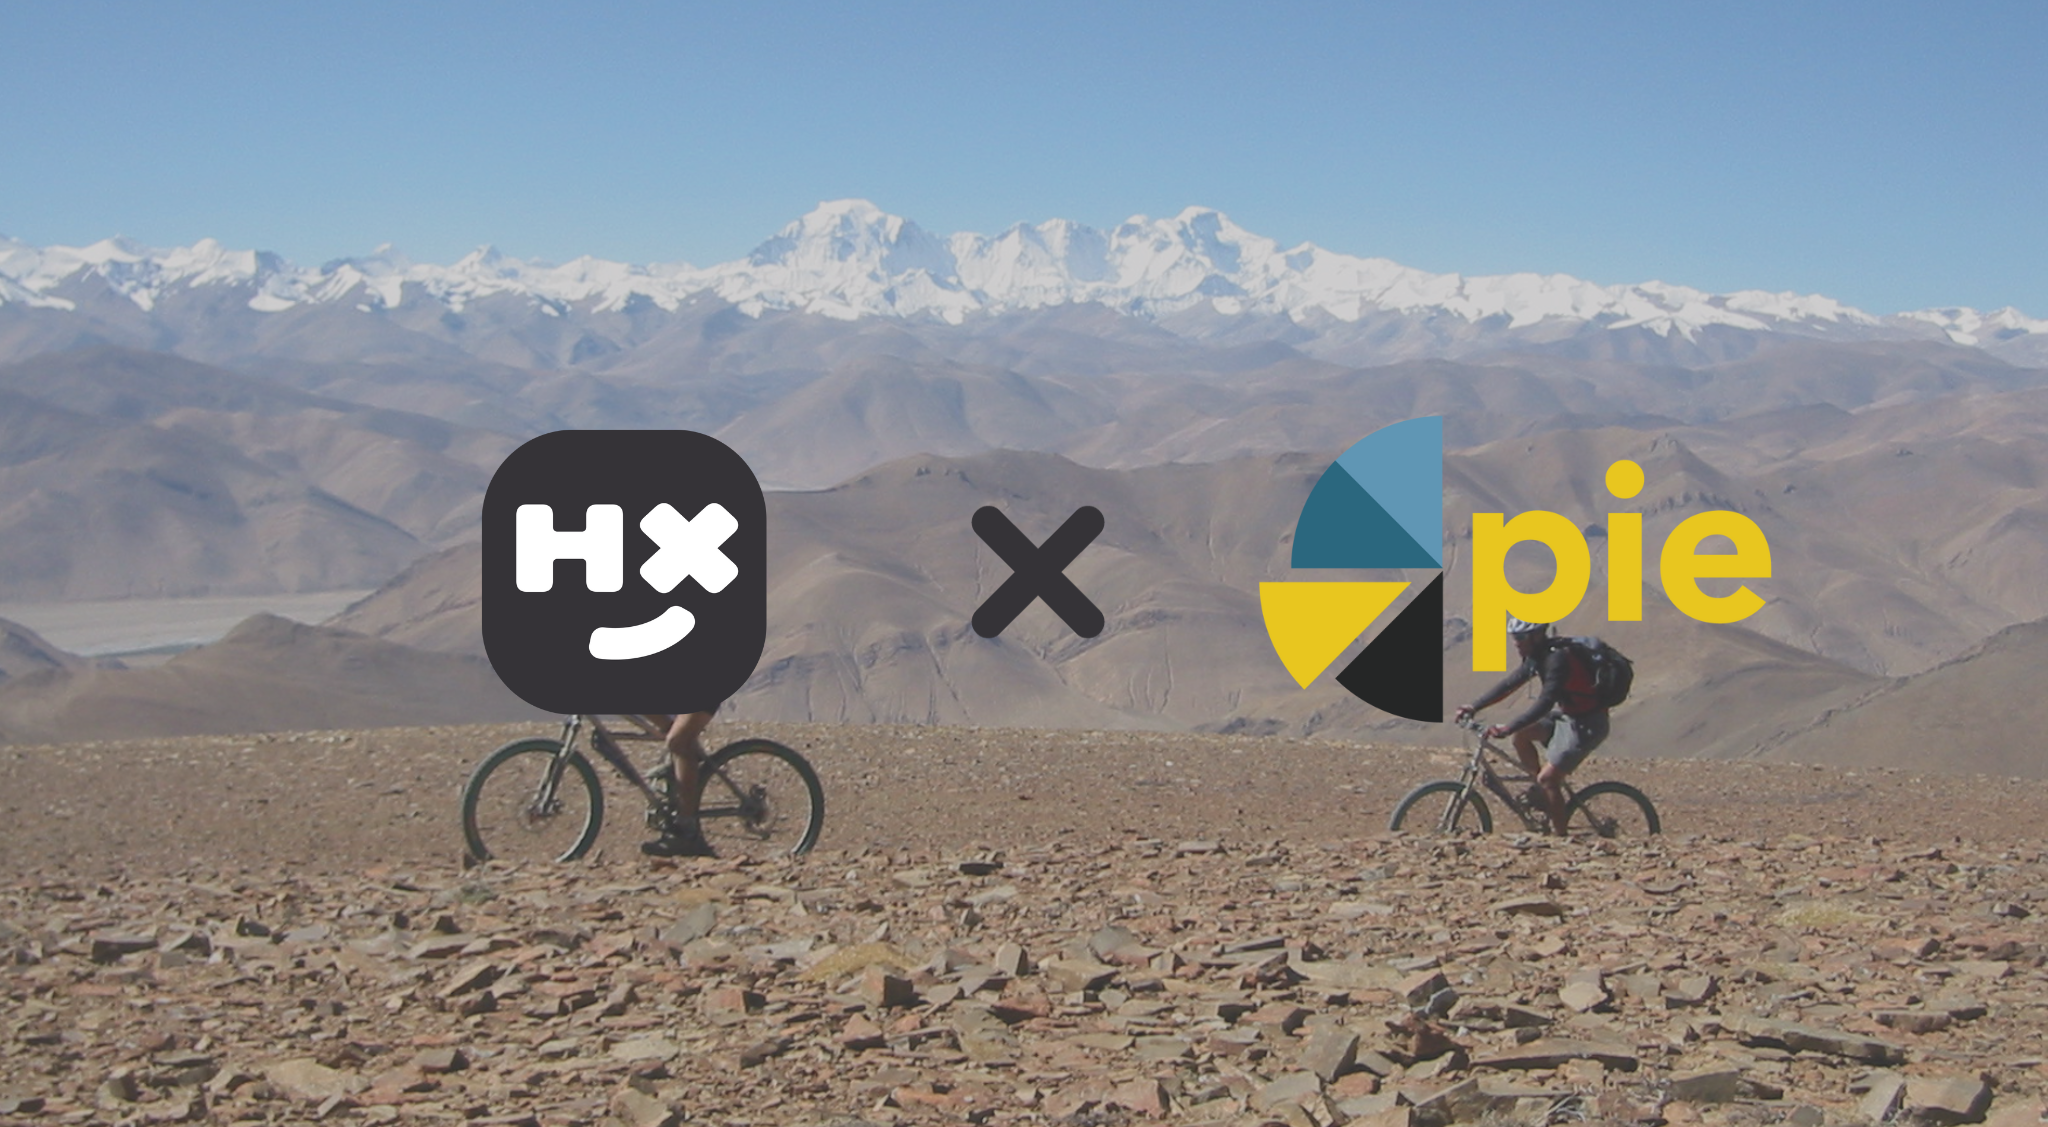 Humanitix favicon and pie logo against the backdrop of two people biking in a mountainous landscape